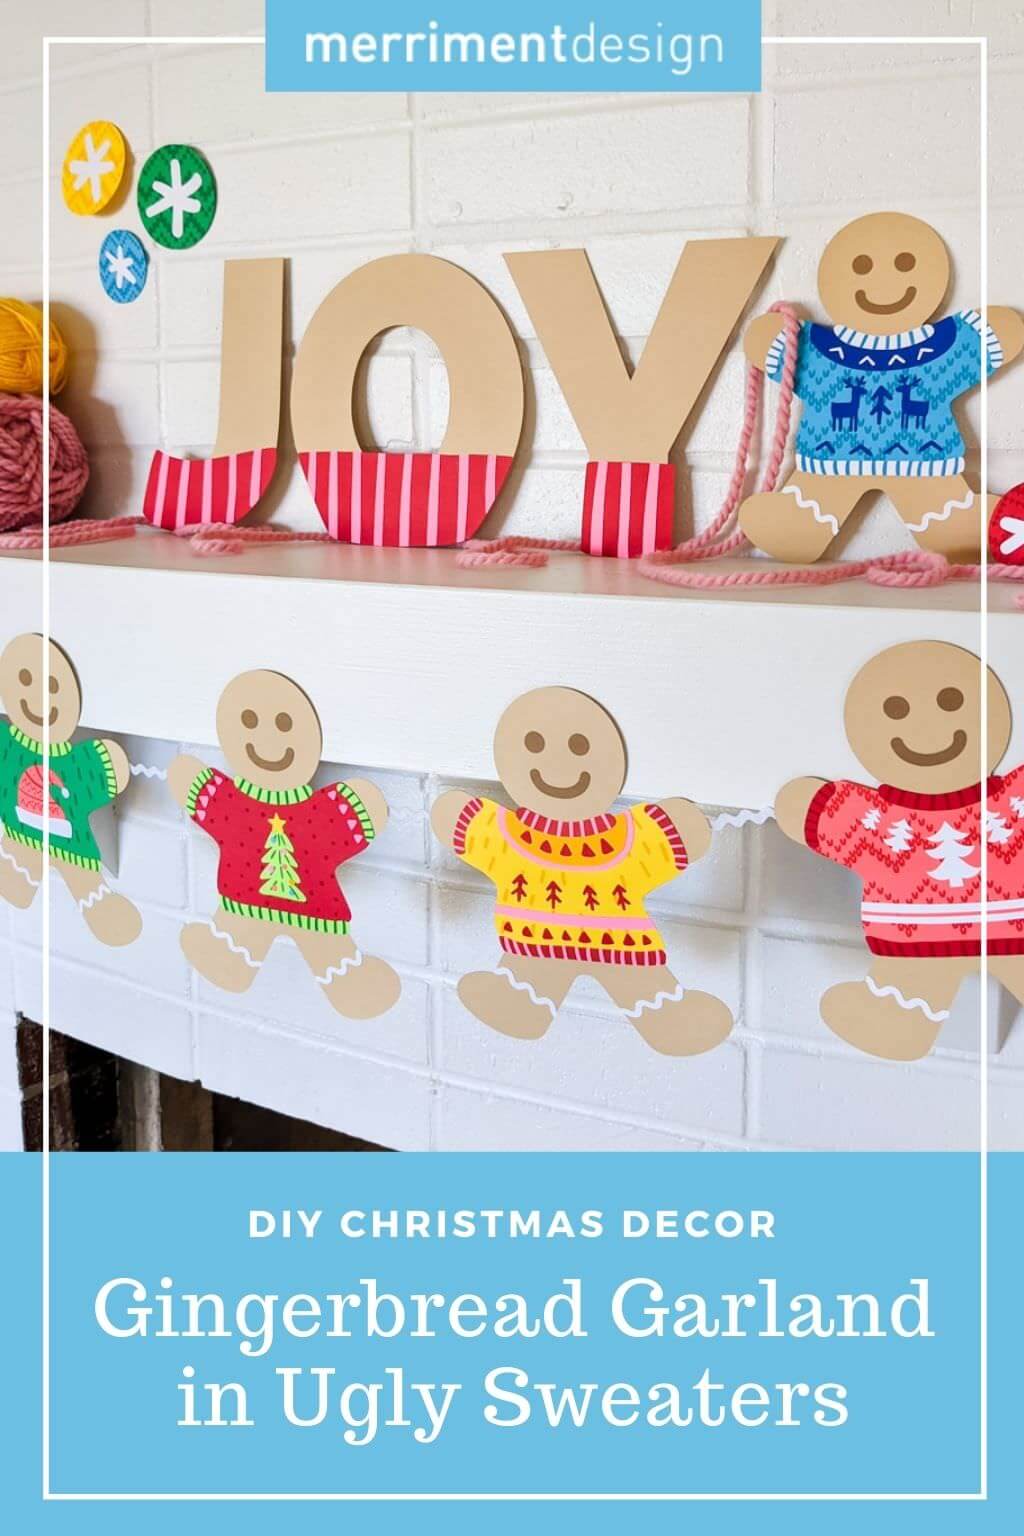 Gingerbread garland in ugly sweaters DIY Christmas decor